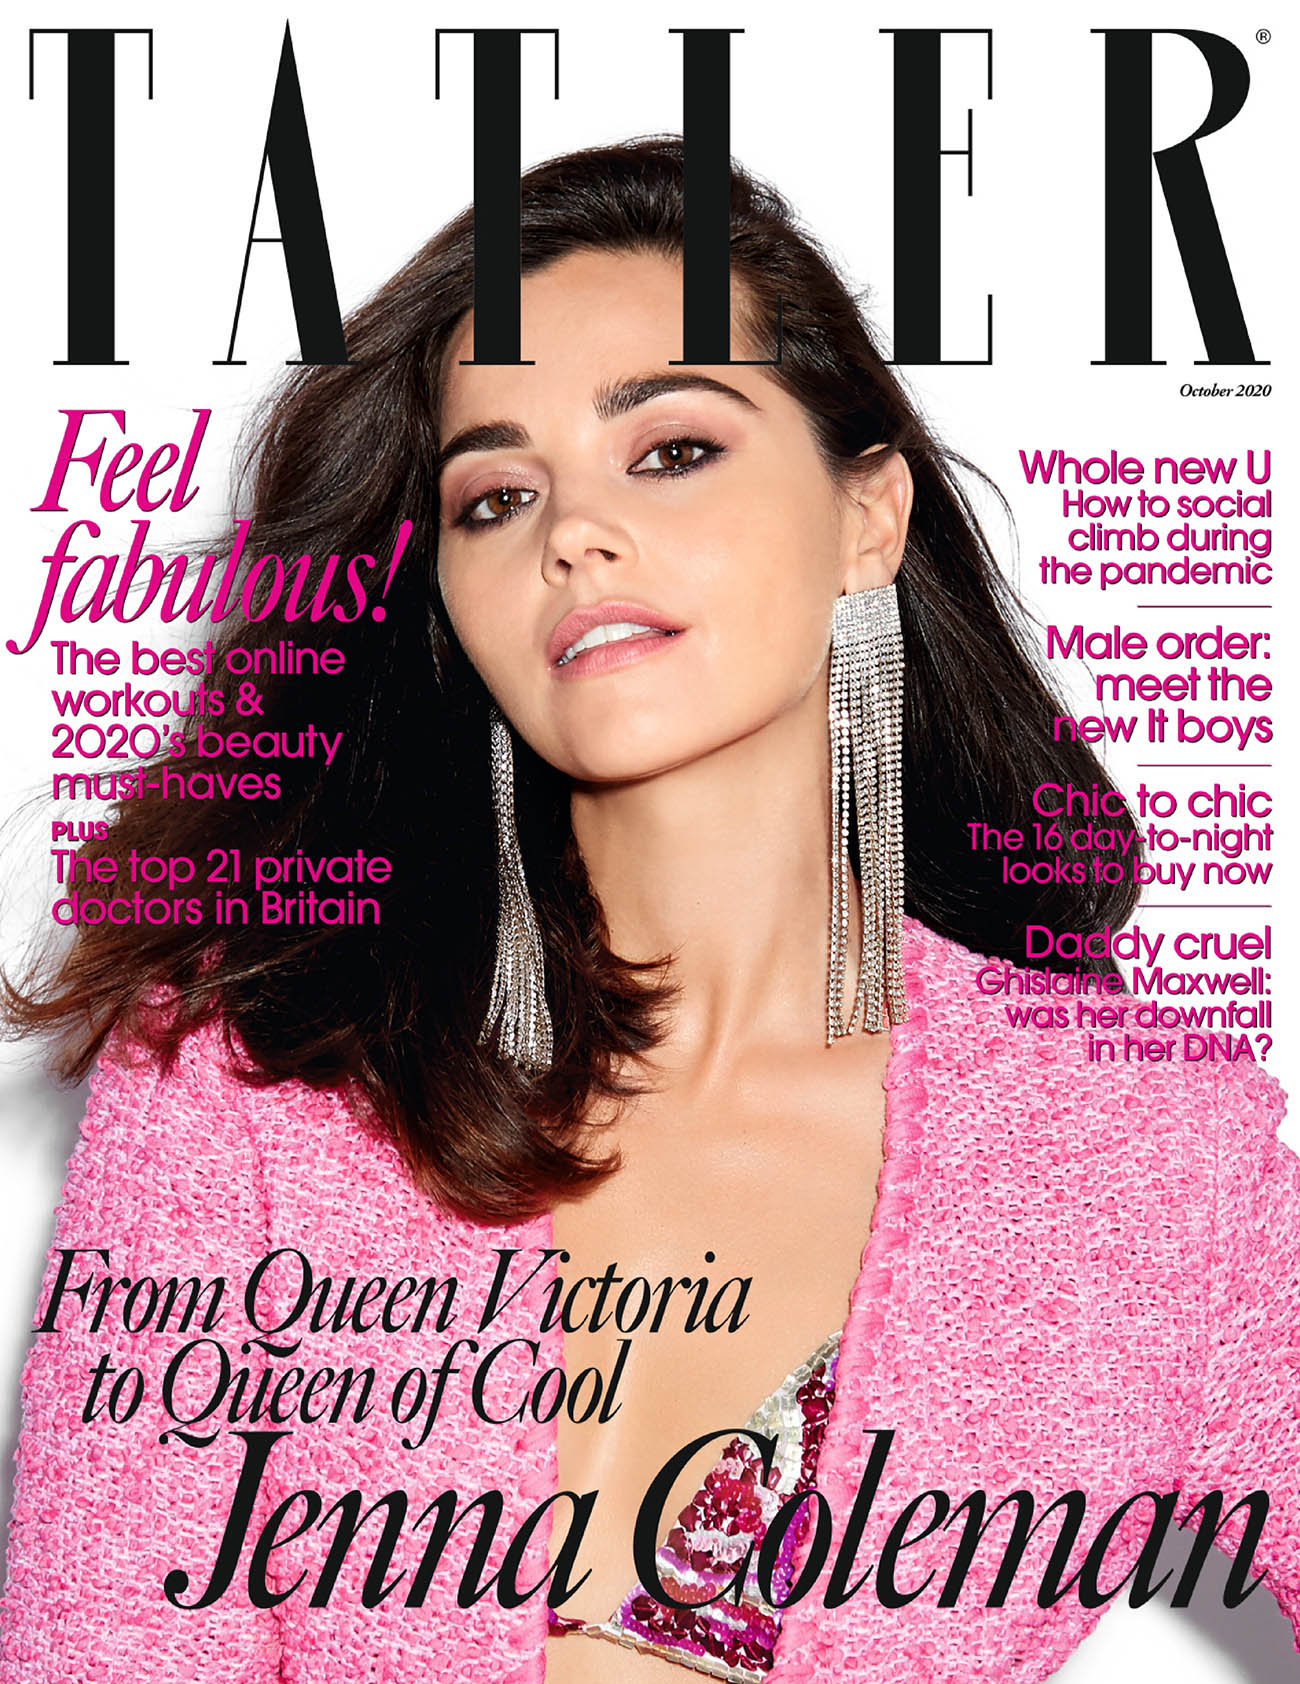 Jenna Coleman covers Tatler UK October 2020 by Claire Rothstein